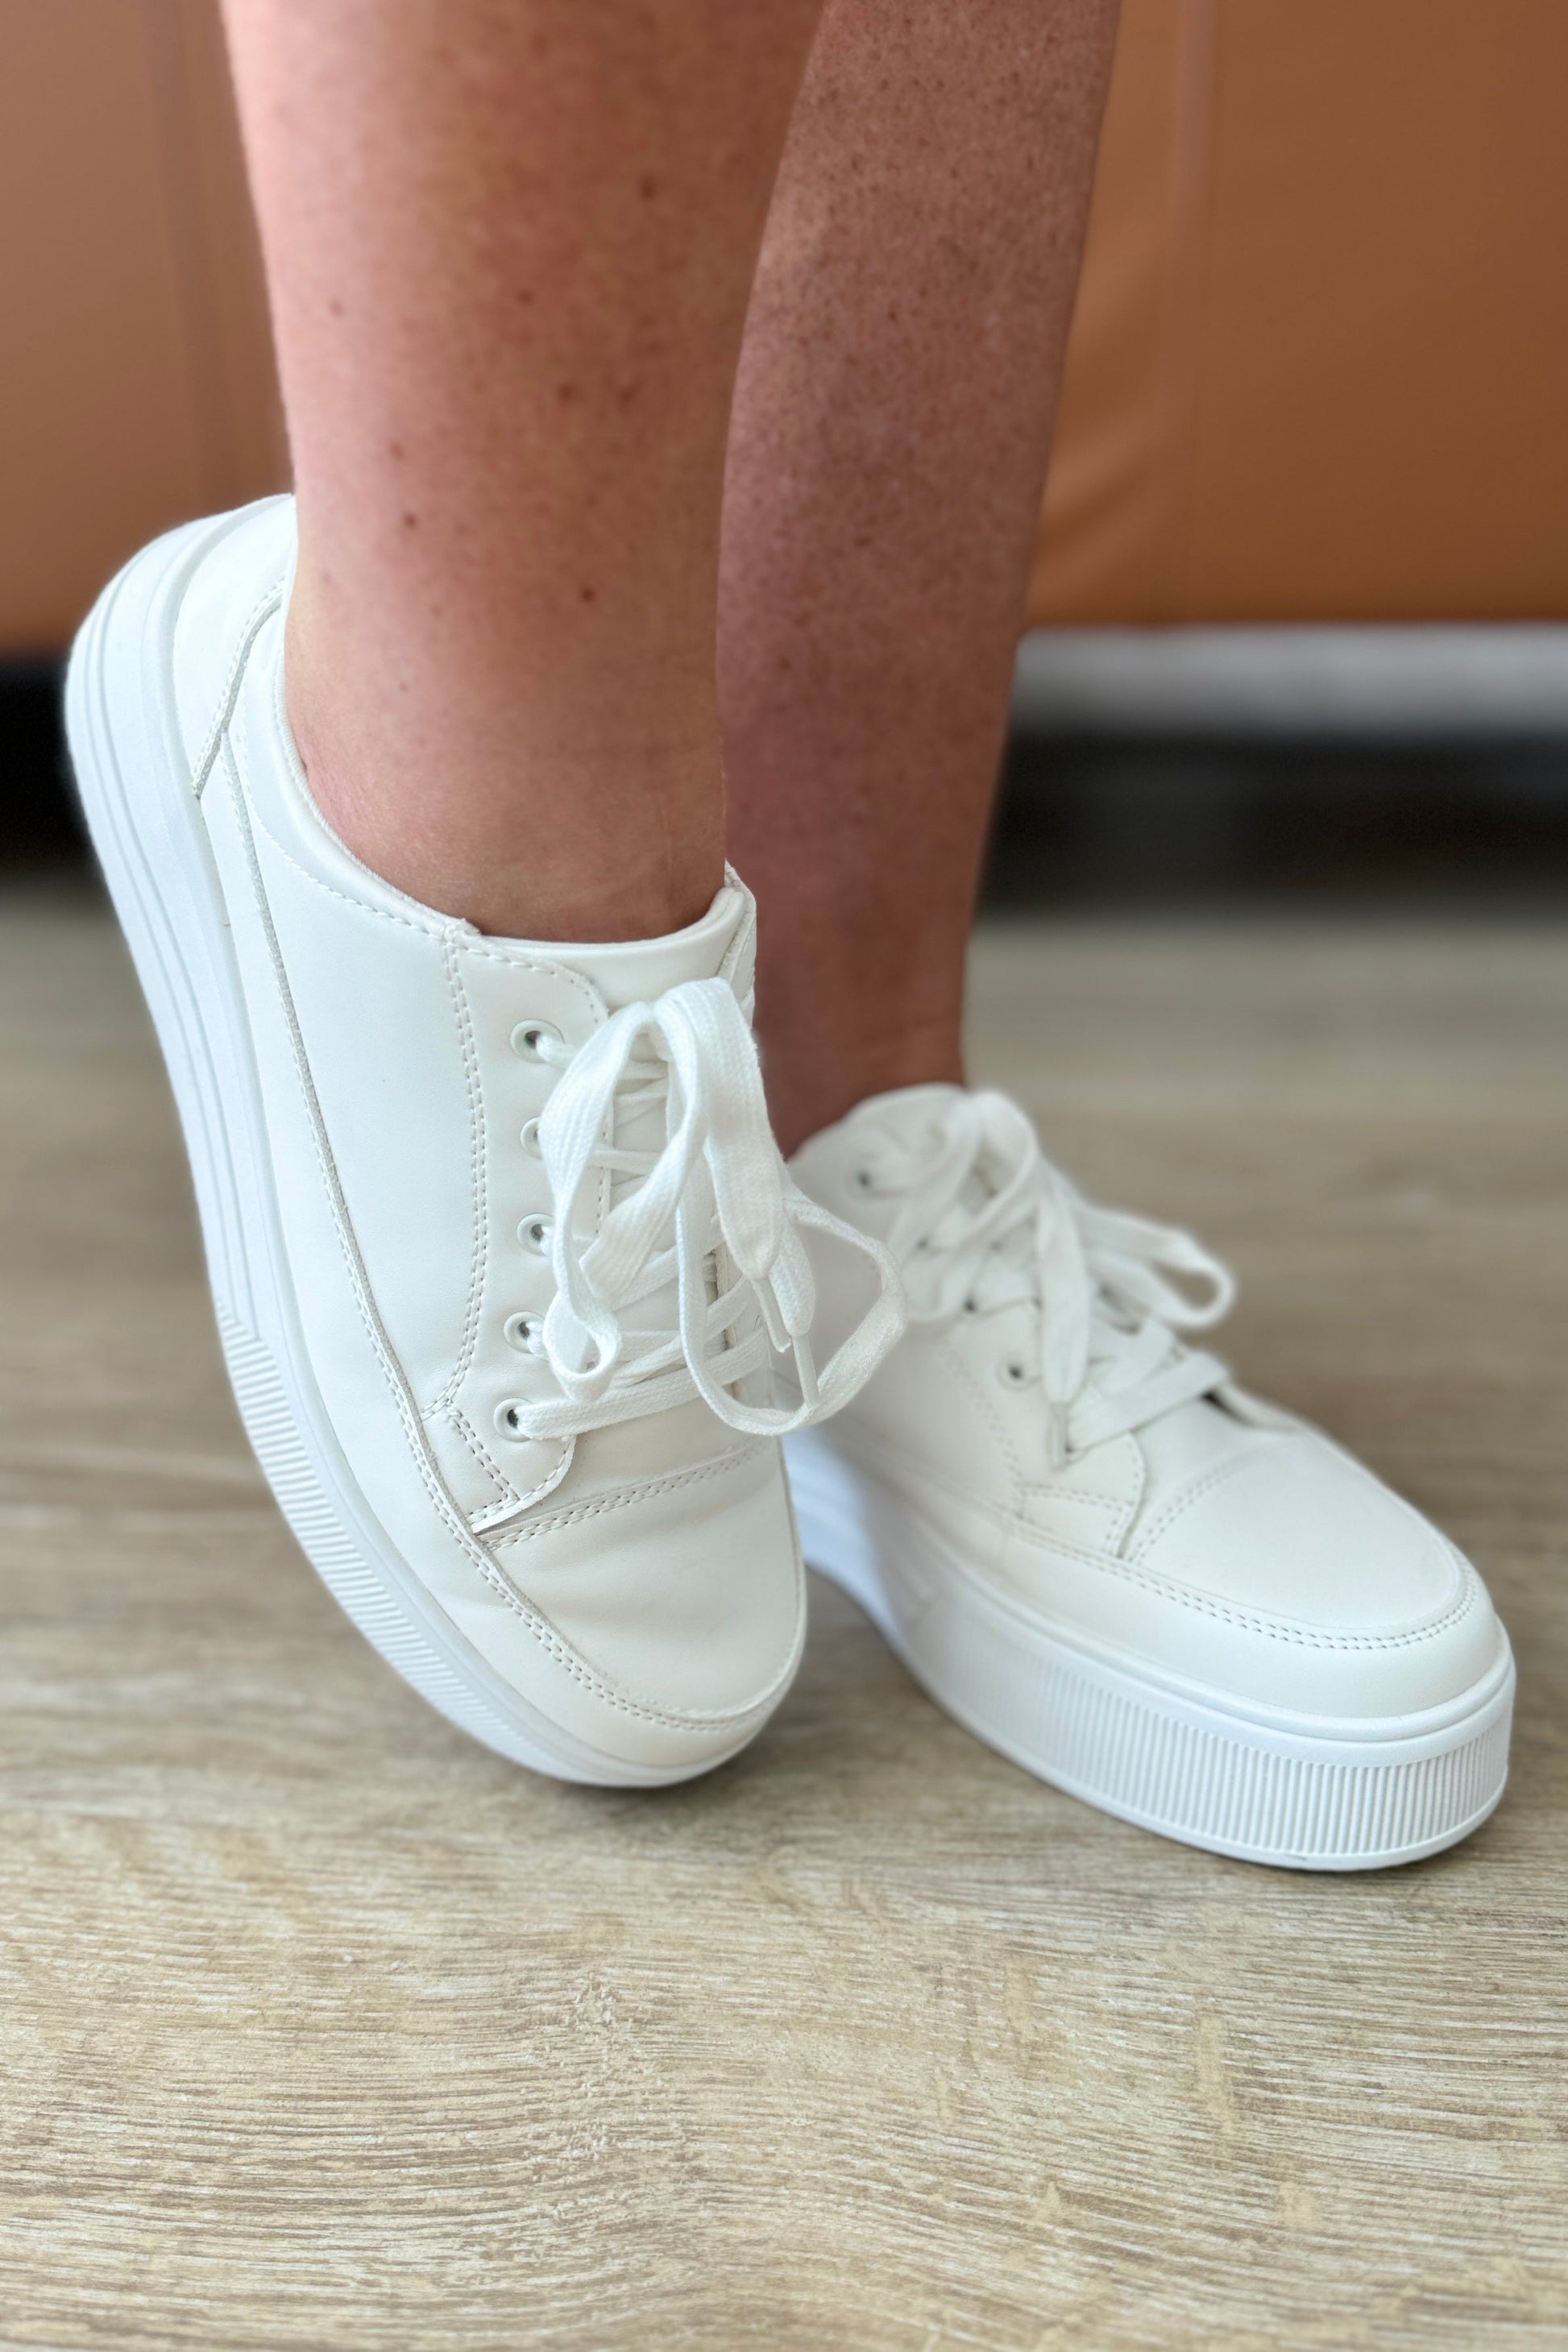 Take You Anywhere Sneakers in White - Fortune Dynamic